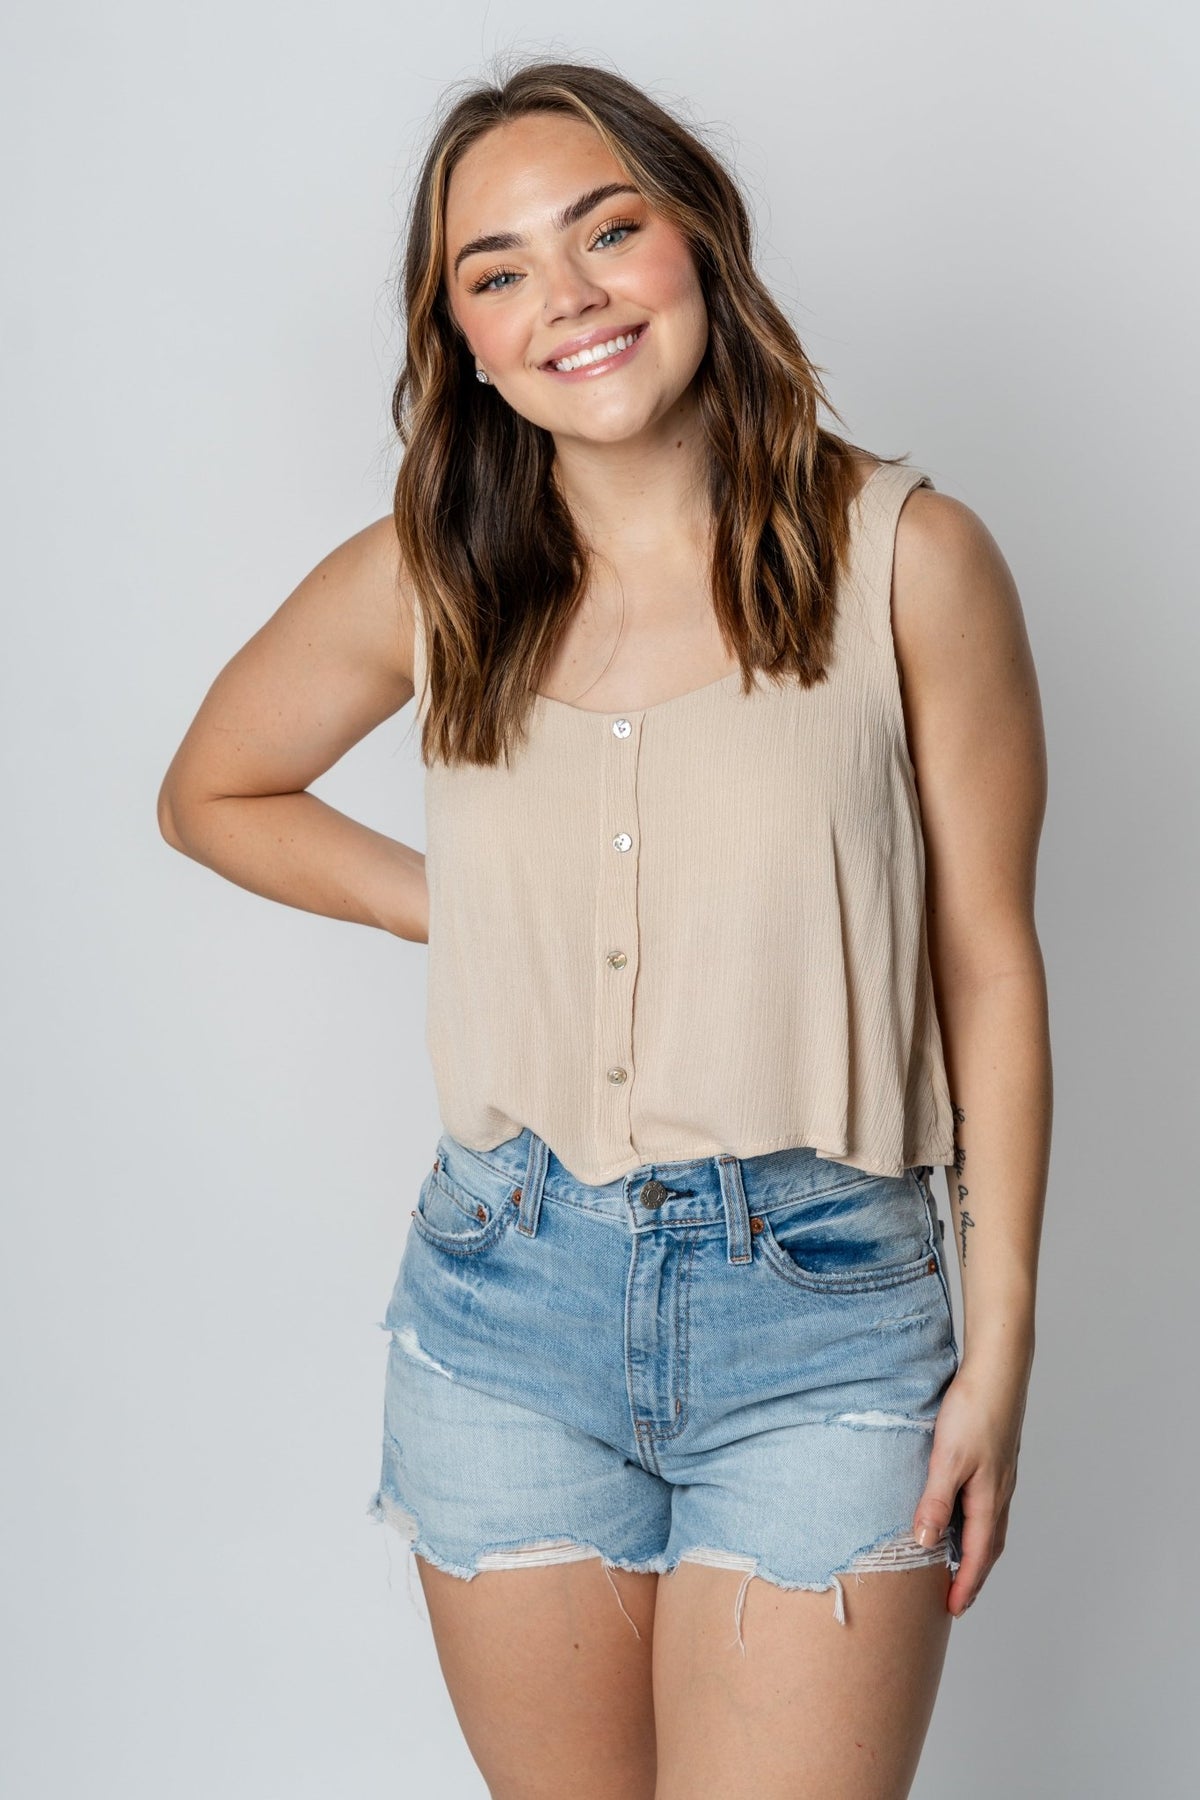 Cropped button tank top cream - Cute Top - Trendy Tank Tops at Lush Fashion Lounge Boutique in Oklahoma City